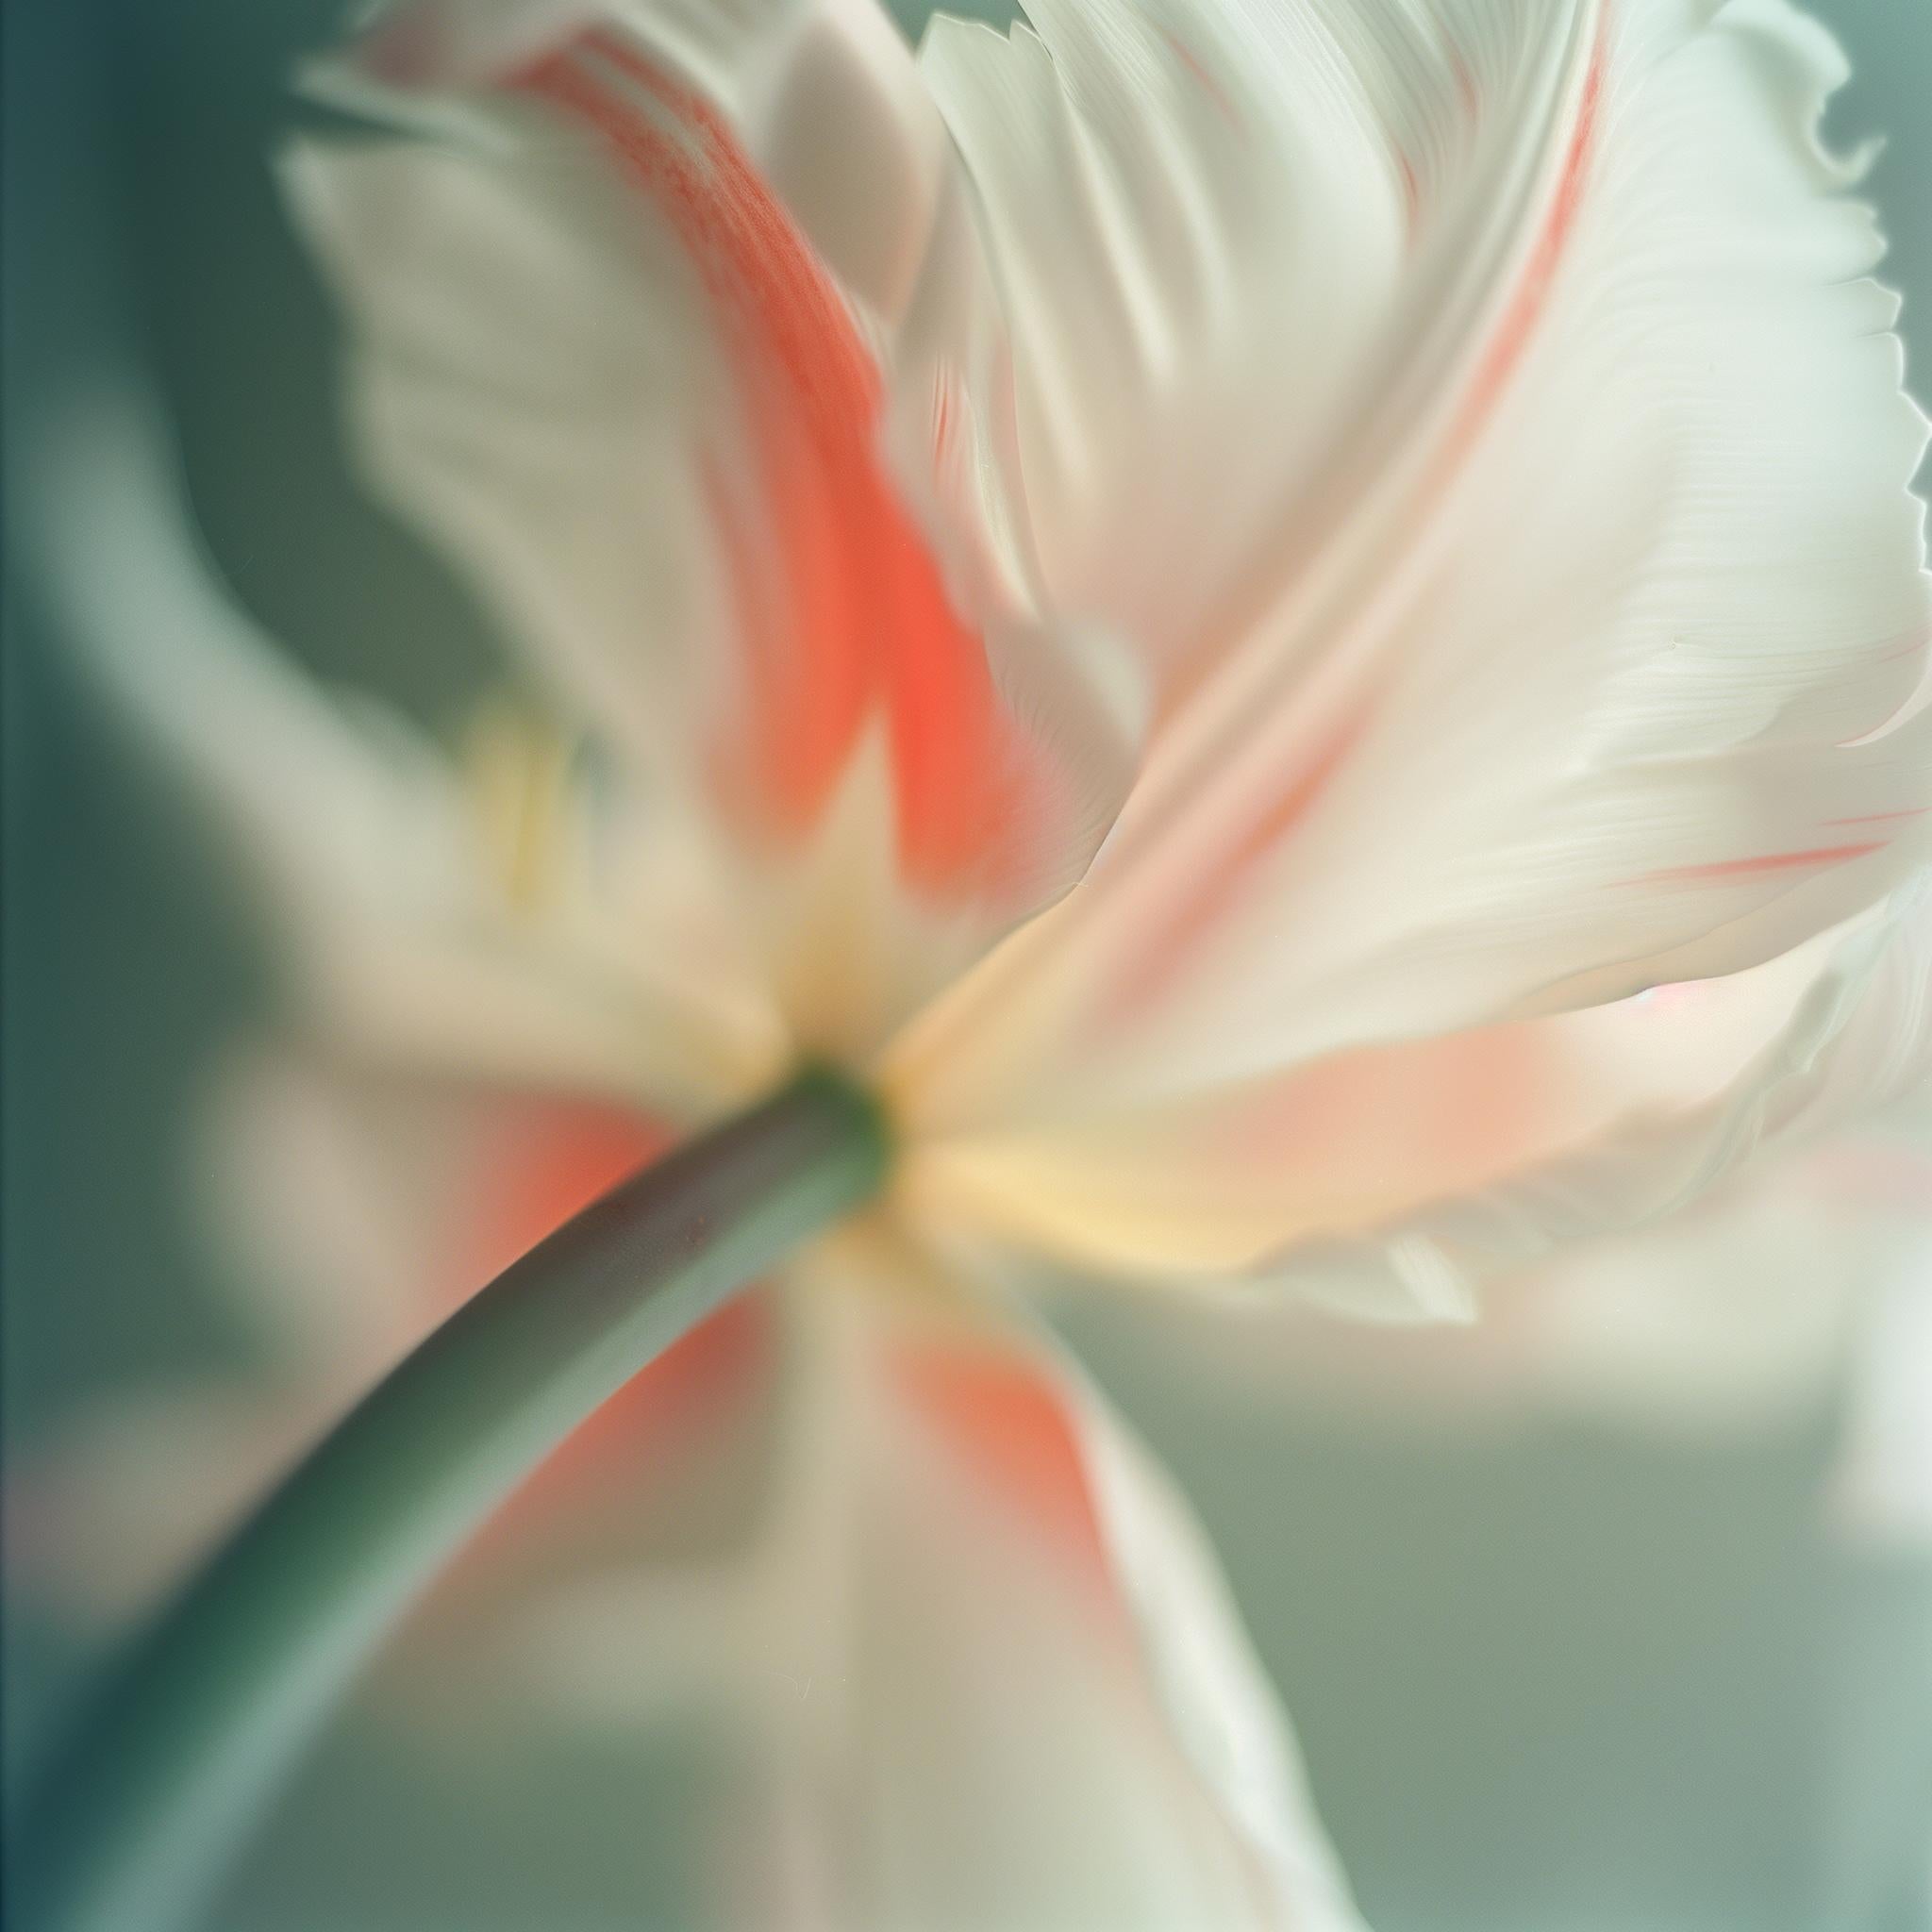 REMBRANDT TULIP (After Georgia O'Keeffe) photograph on plexiglass  - Photograph by Max Grant